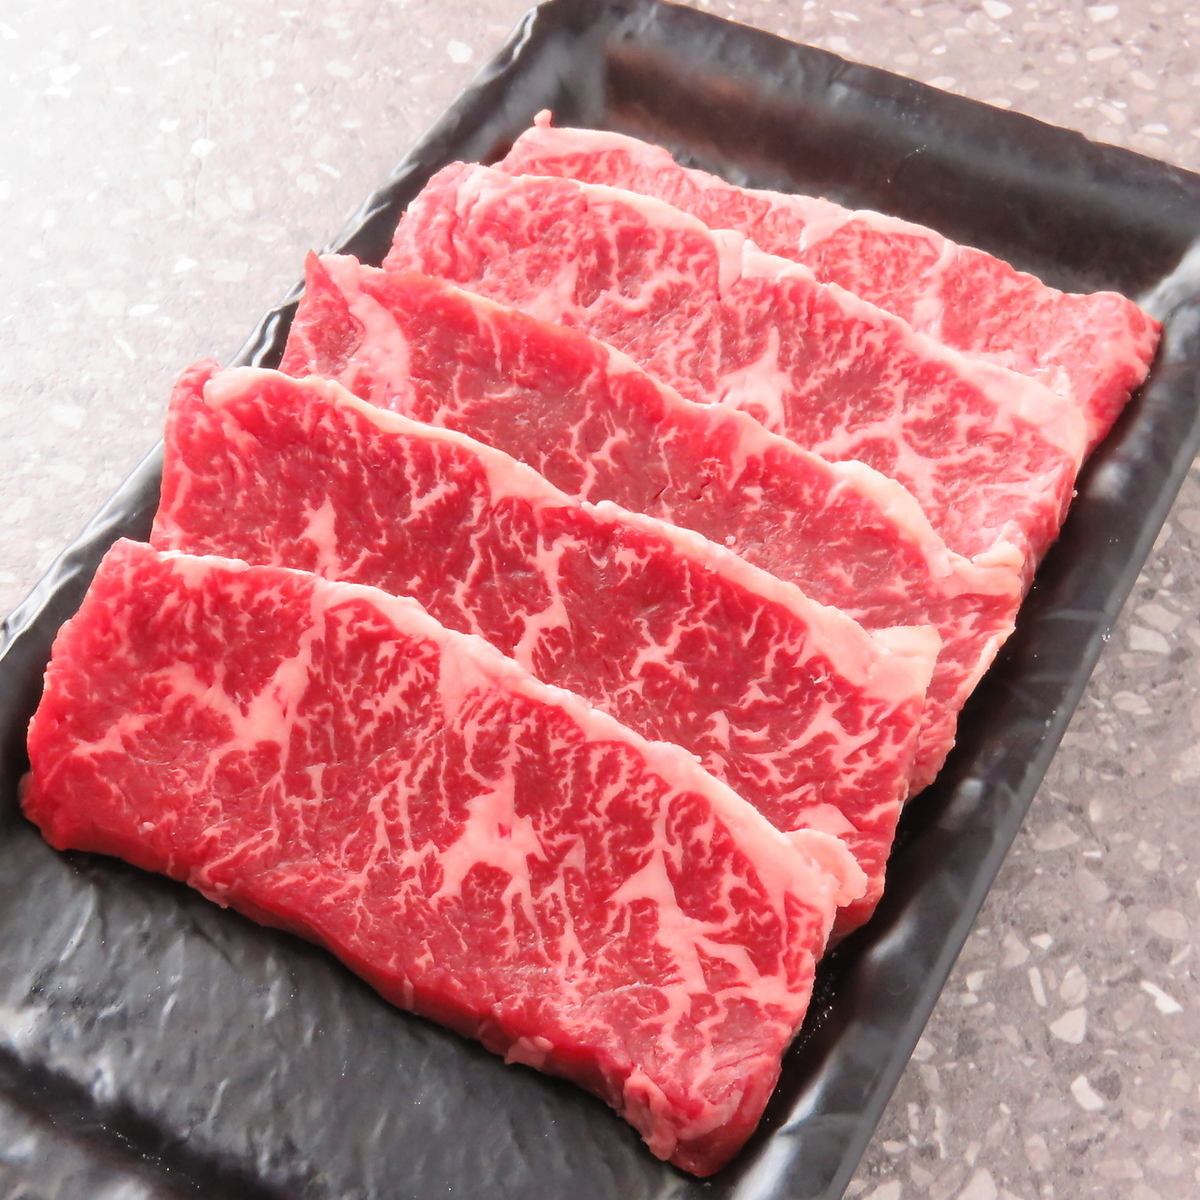 How about an exquisite yakiniku dinner with your family tonight?